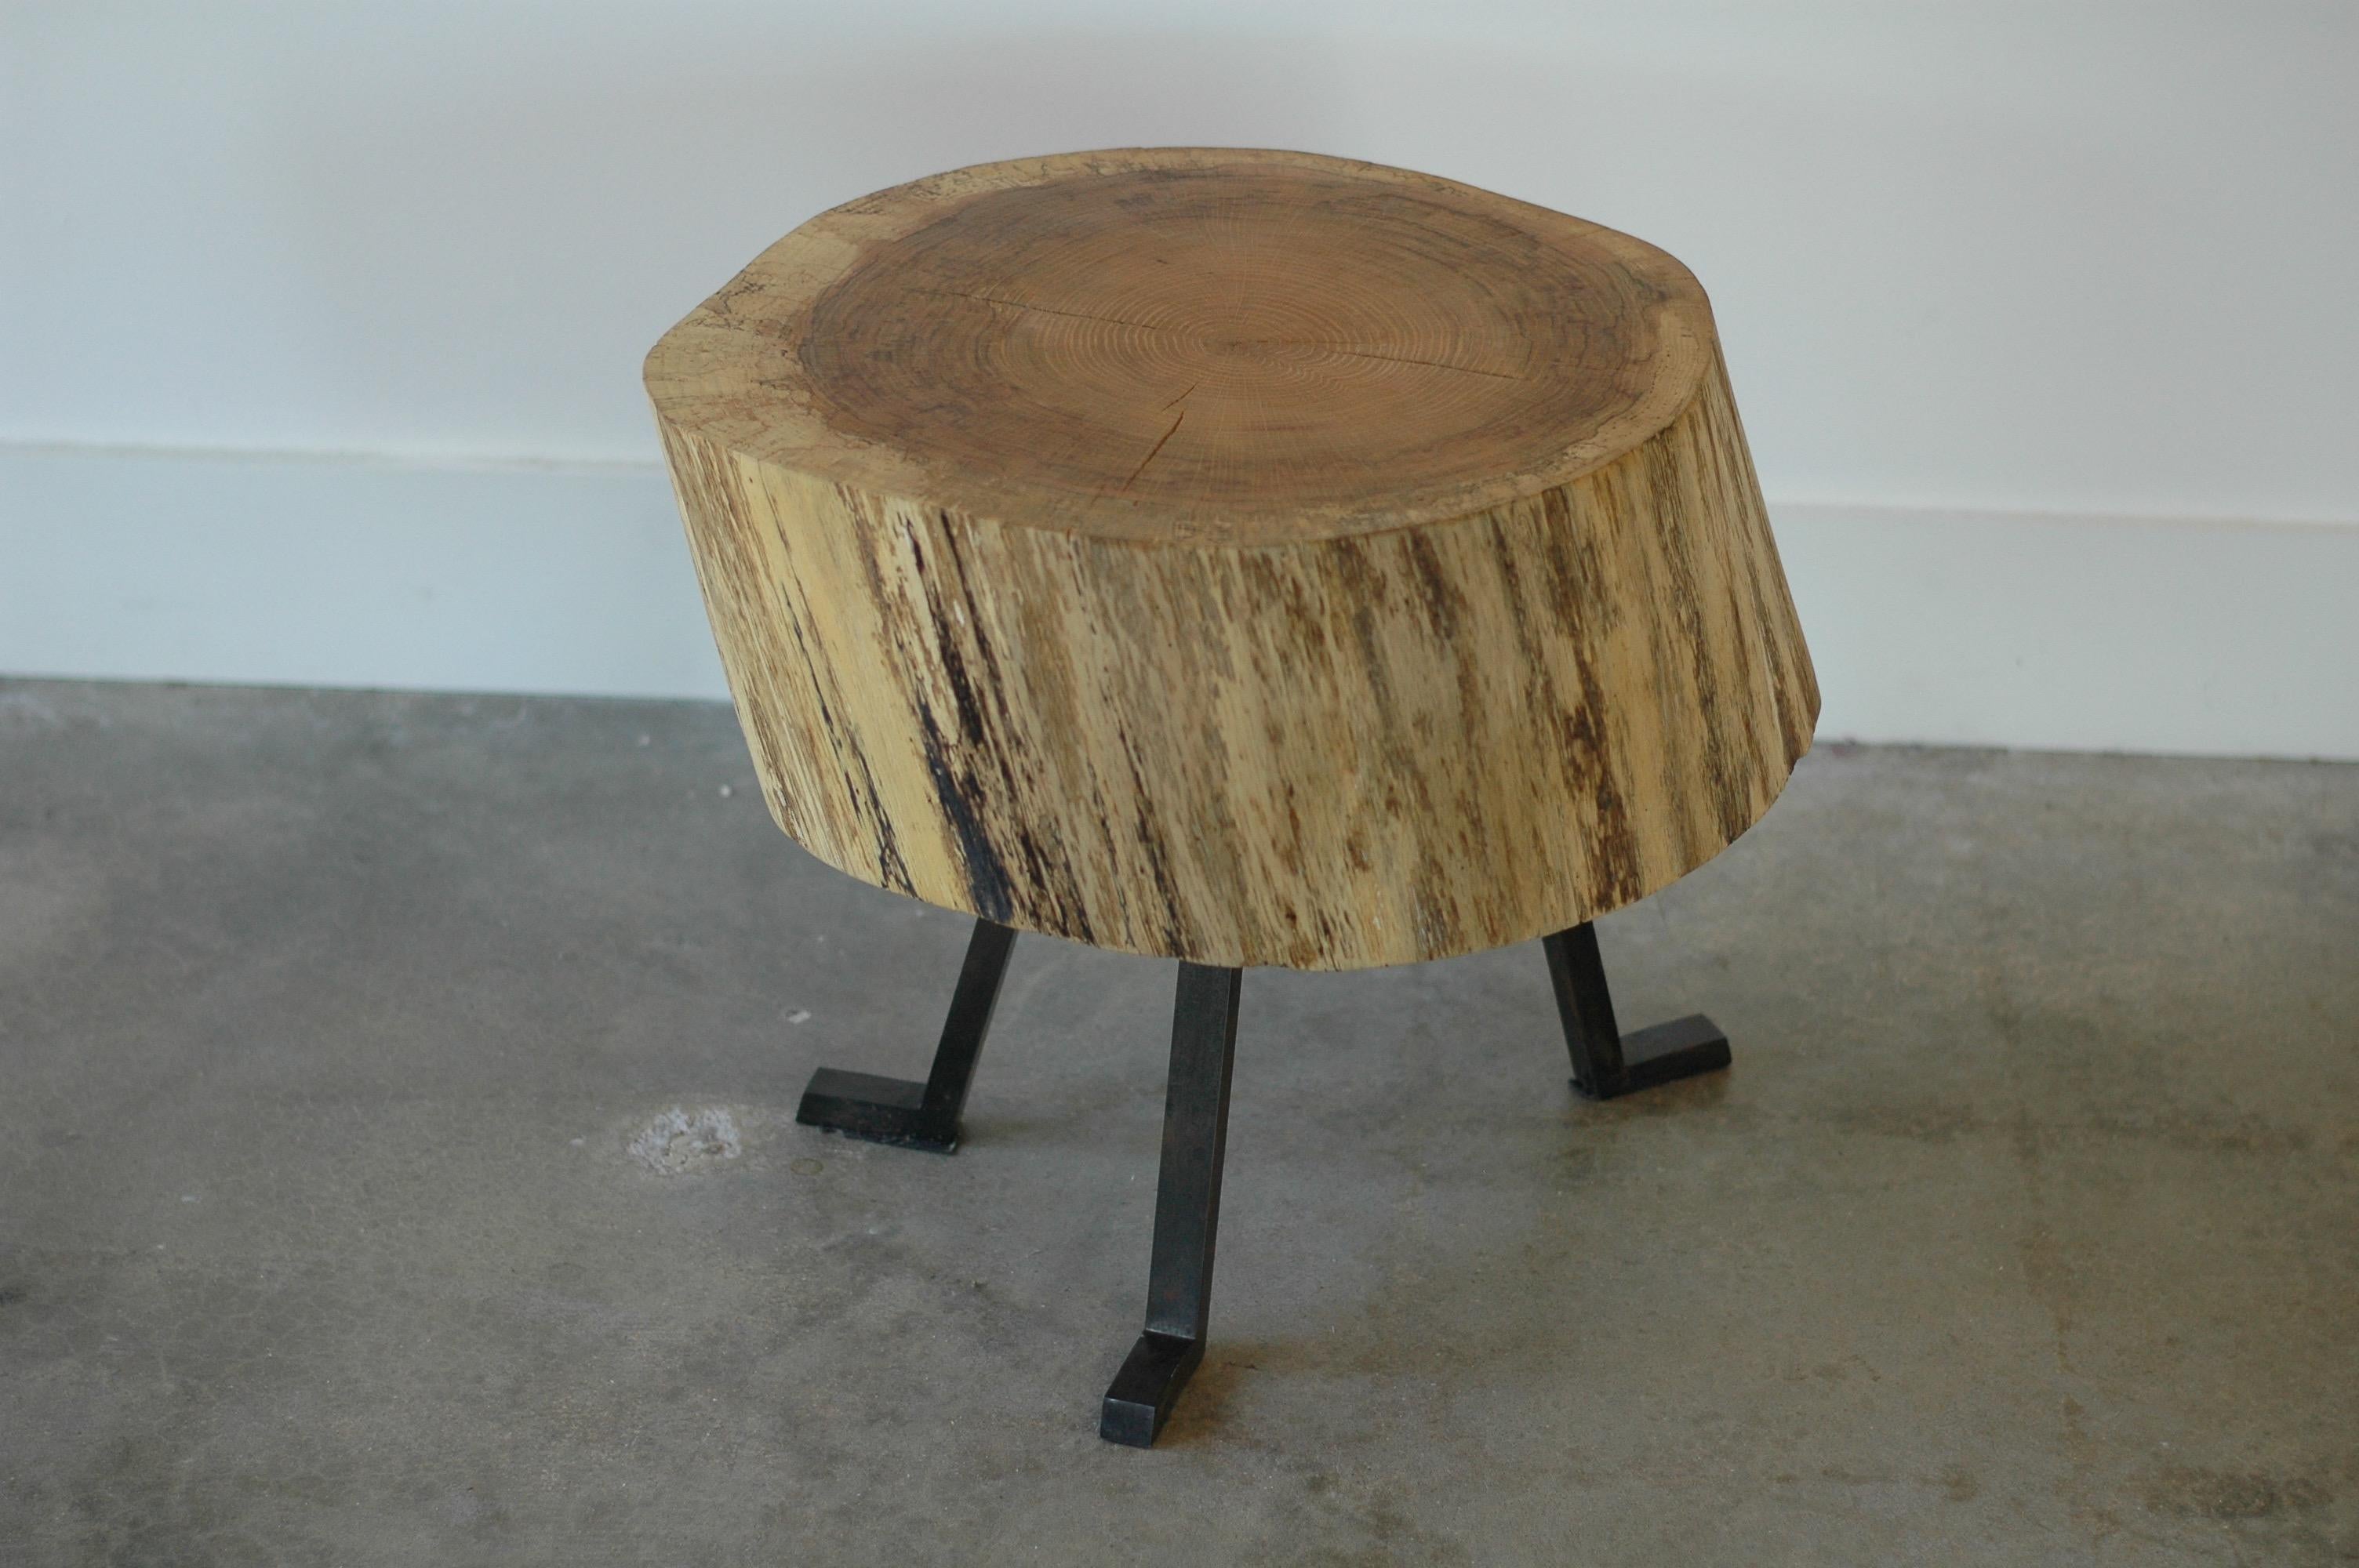 This Live Edge round side table in oak is an occasional table, a coffee table, or a side table. We call it the Sputnik table. It is certainly irregular and that’s why you’ll love it. The three metal legs attached to live edge piece timber evoke the